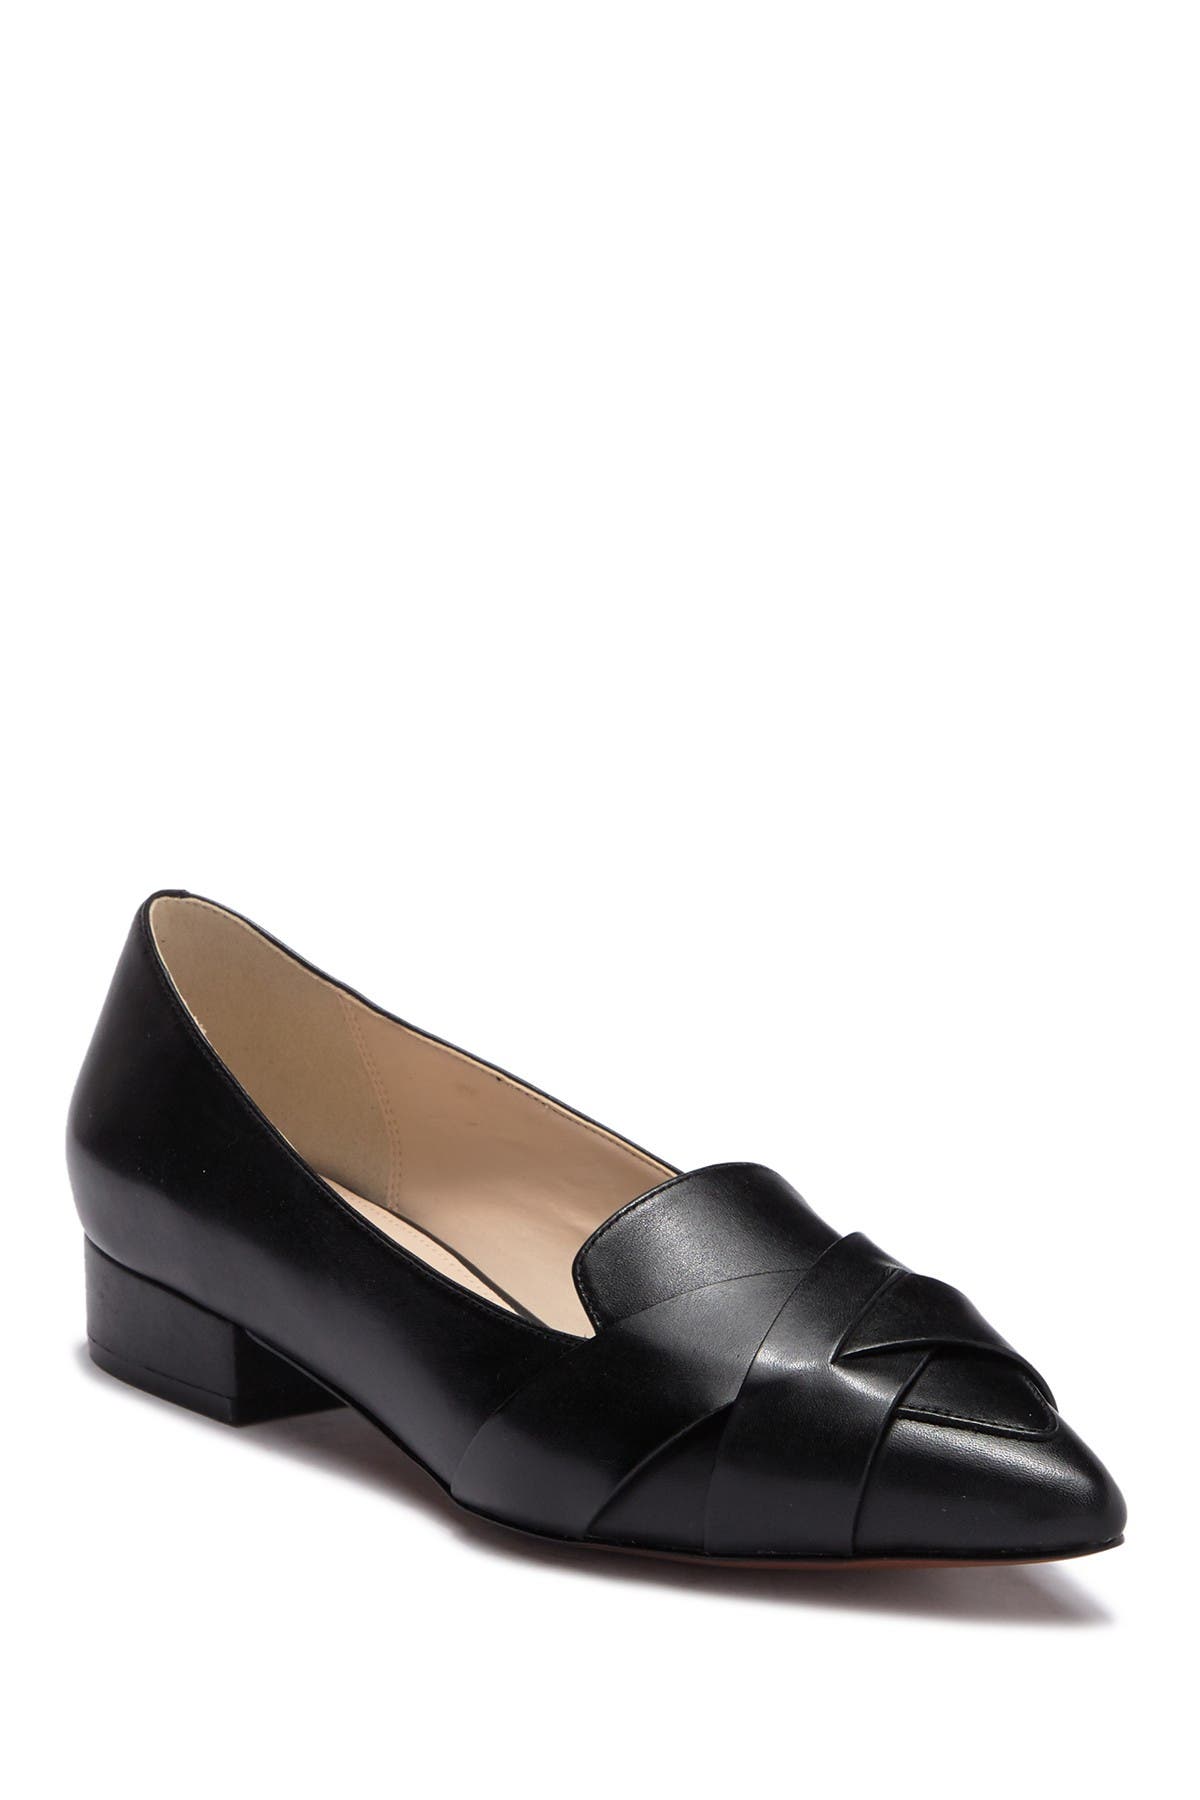 Cole Haan | Camila Leather Skimmer Flat 